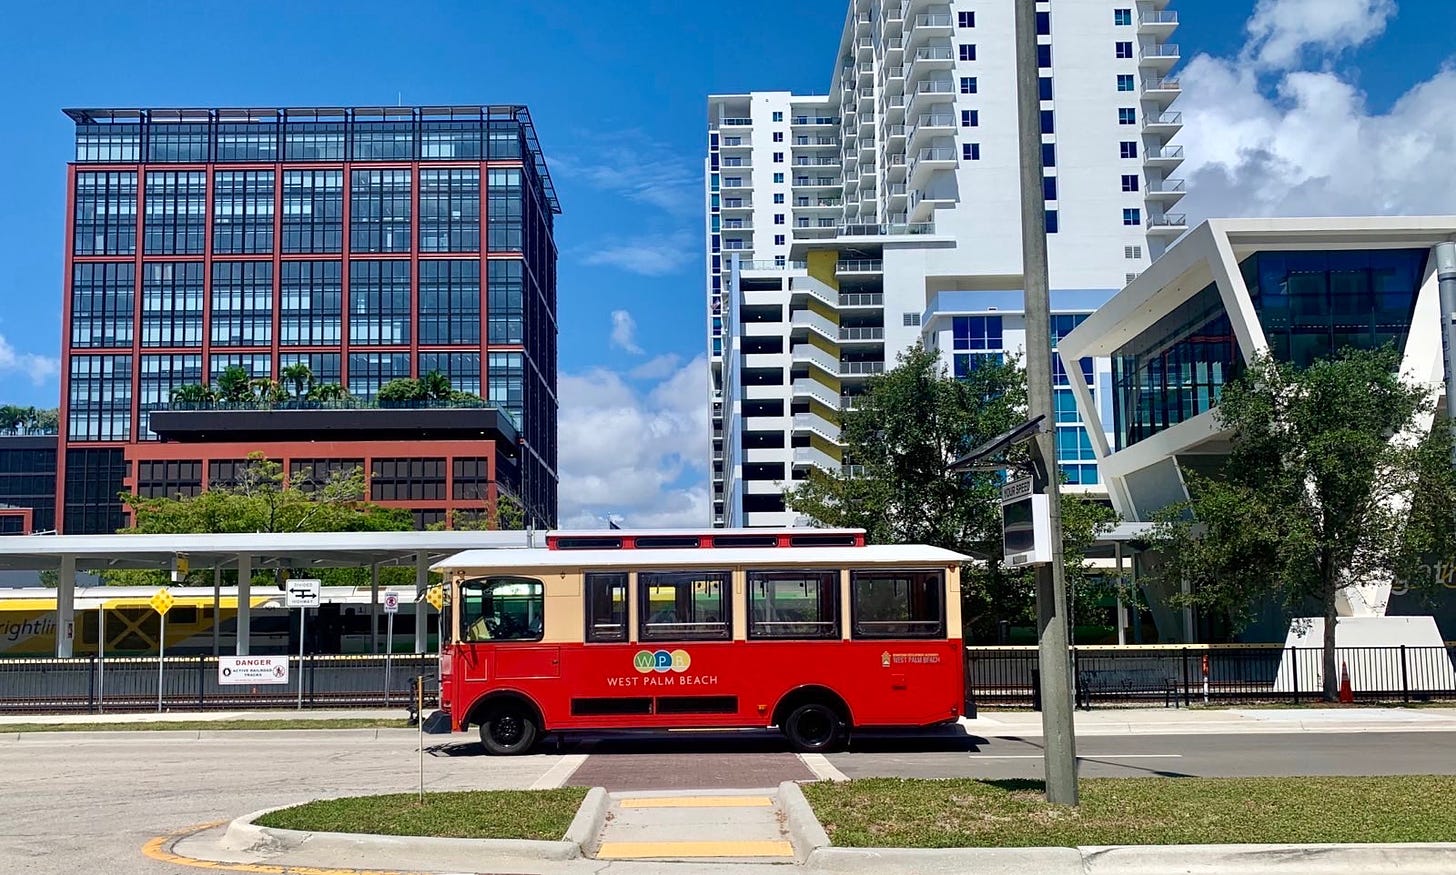 Skyline of West Palm Beach with trolley in the foreground.